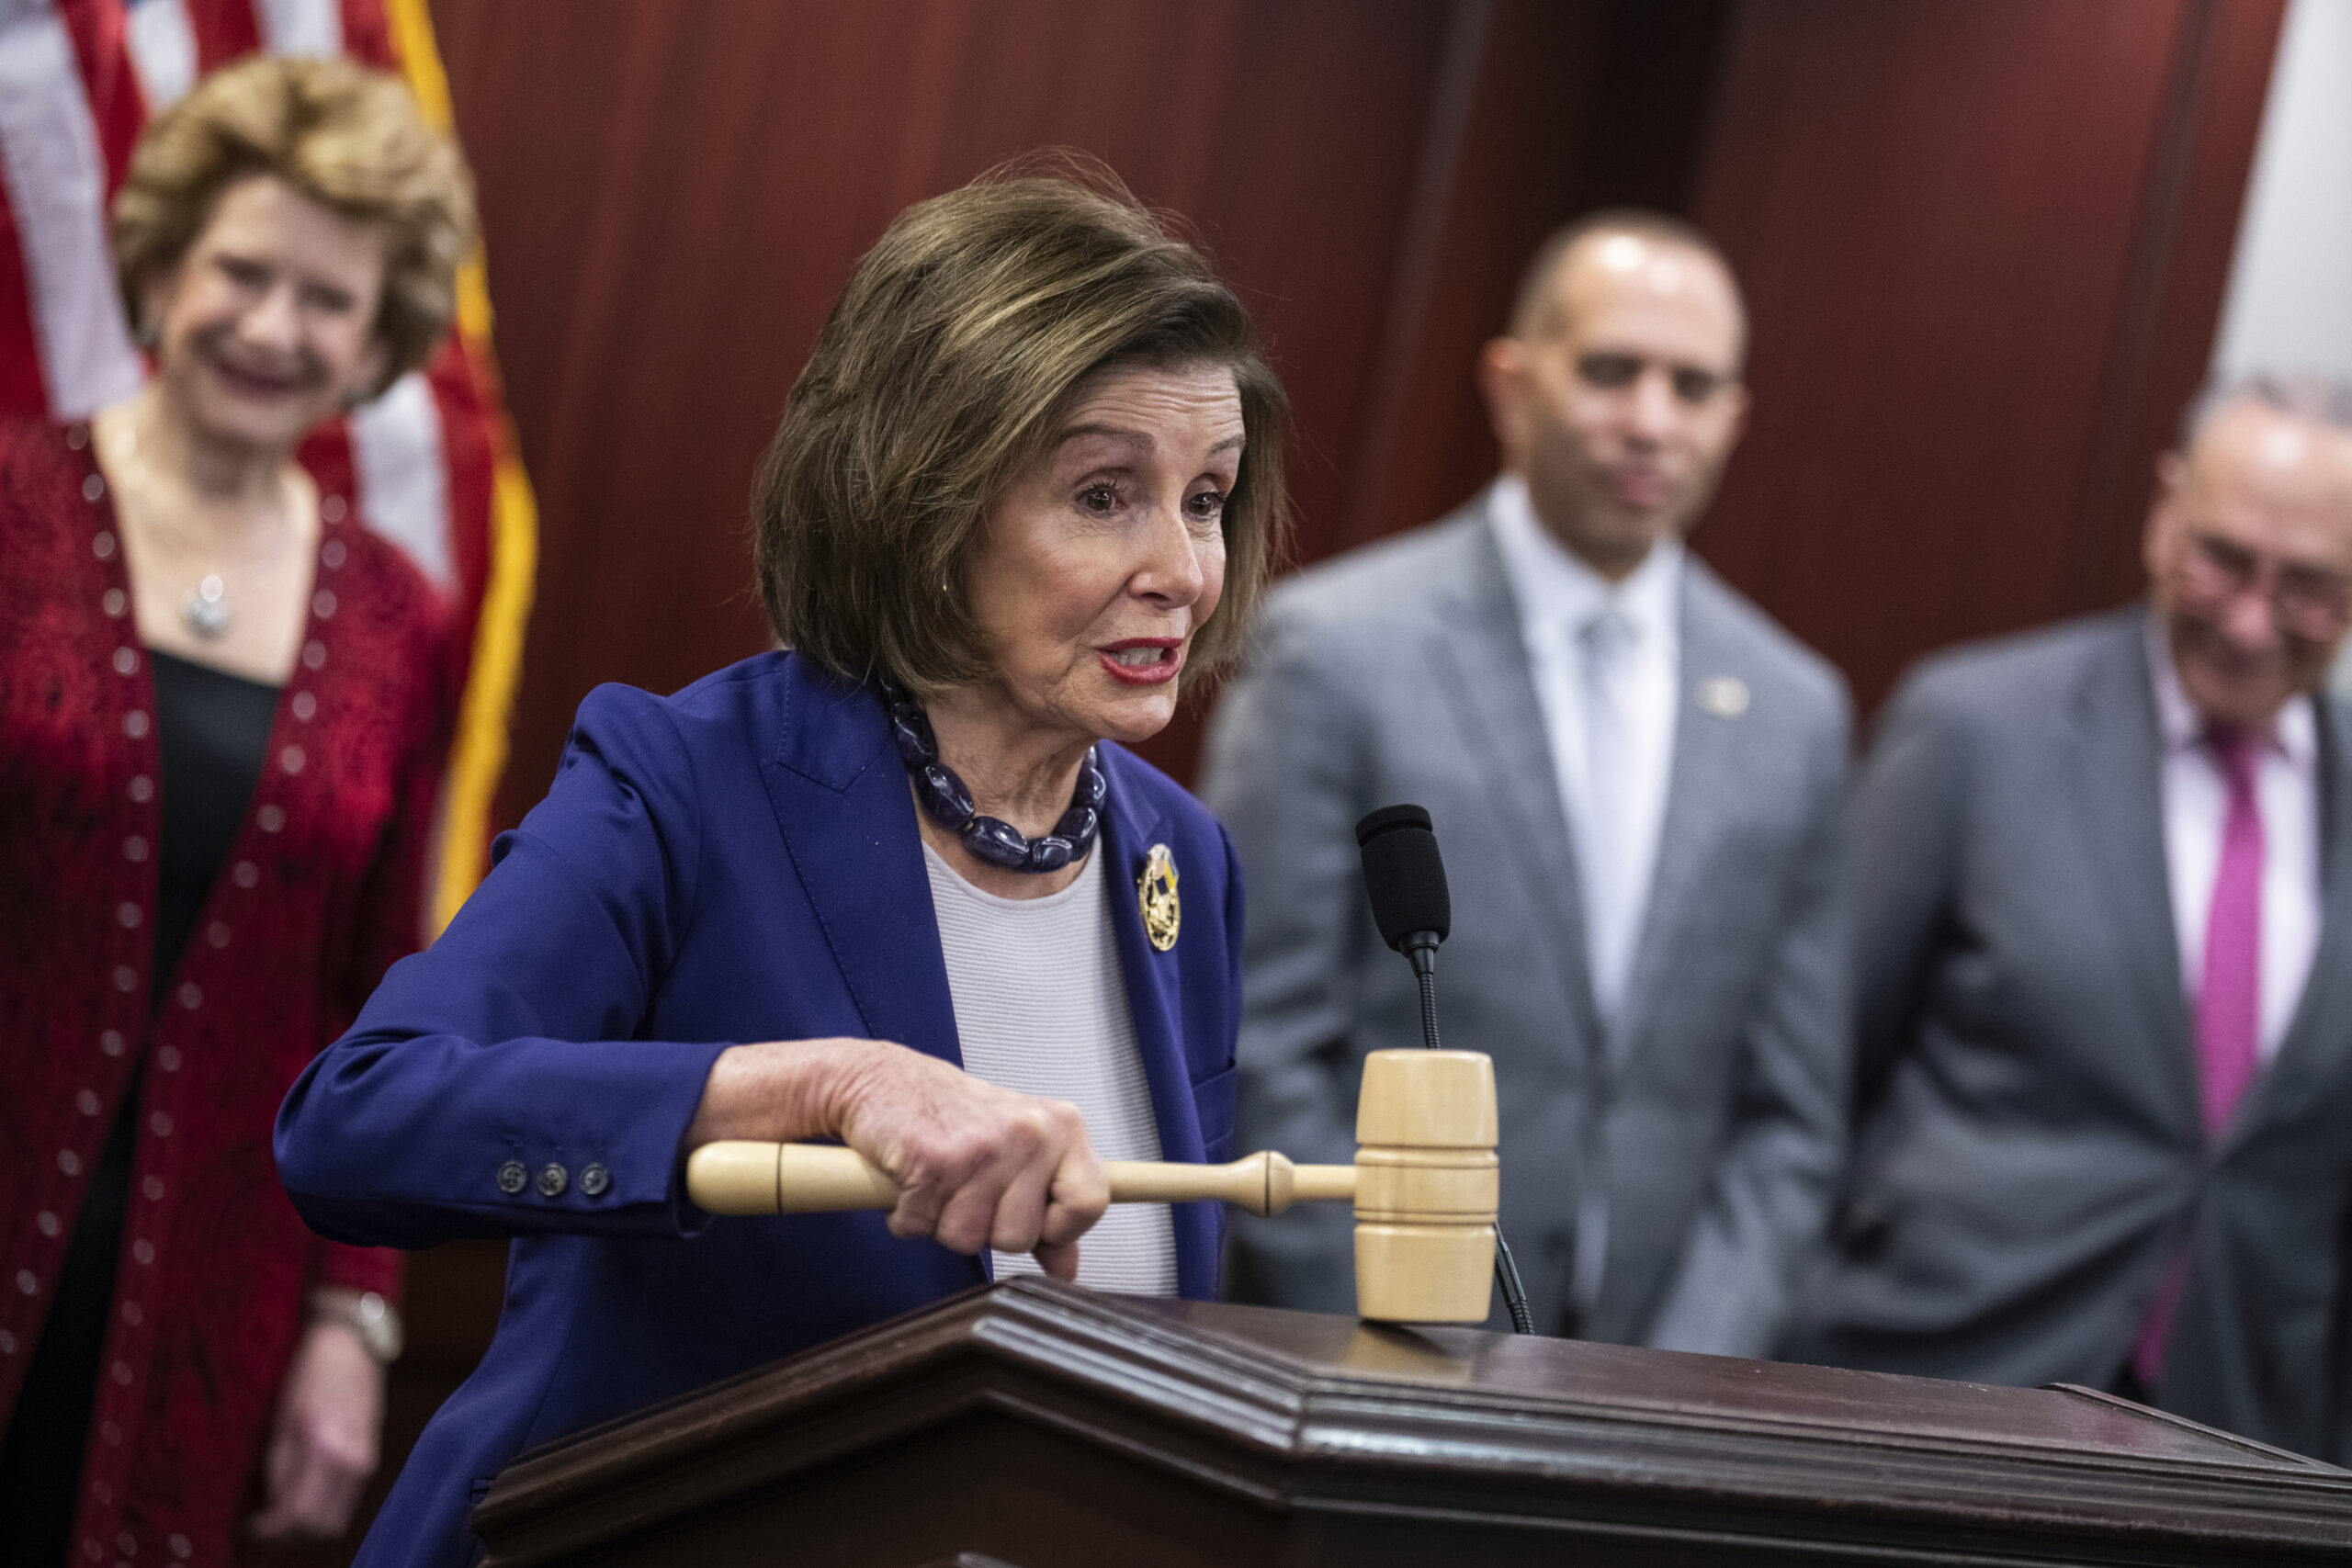 Pelosi Joins Dem Lawmakers In Calling For Biden to Stop Giving US Weapons to Israel